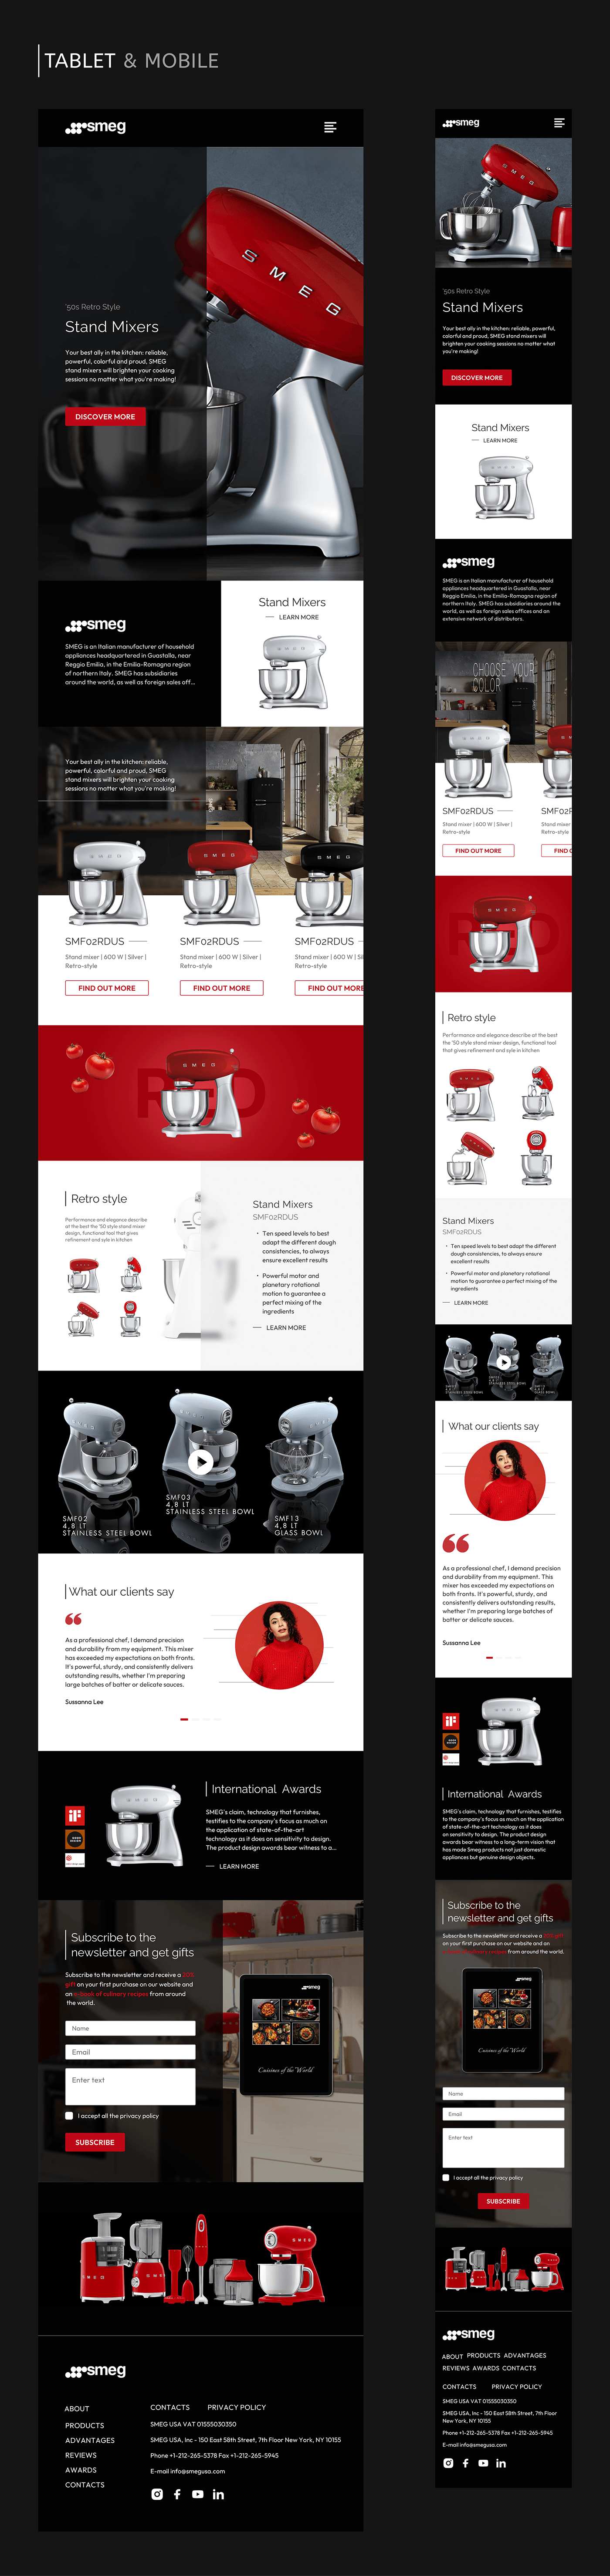 landing page Web Design  smeg Stand Mixer kitchen UI/UX adaptive design Product Page cooking devices kitchen gadgets